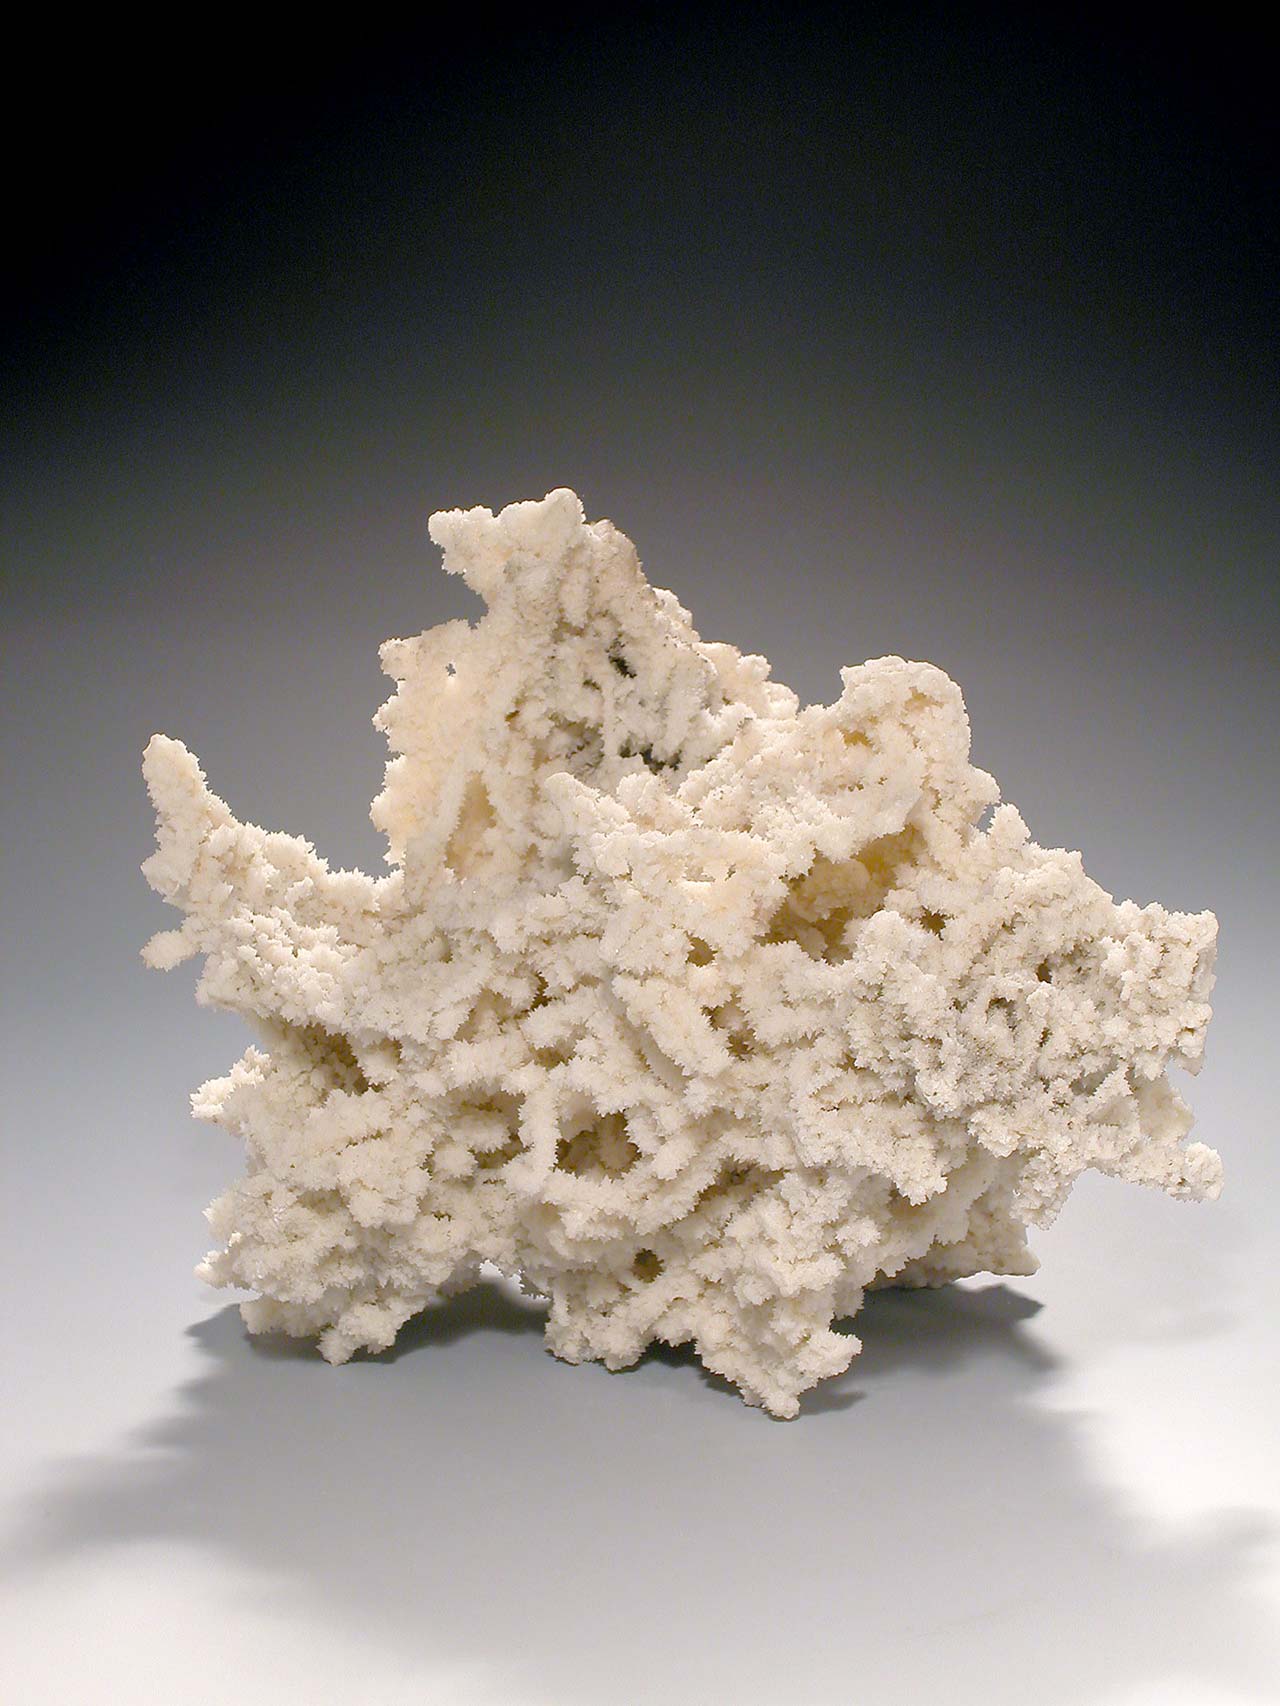 Calcite sample from the natural history collection of Hessisches Landesmuseum Darmstadt.